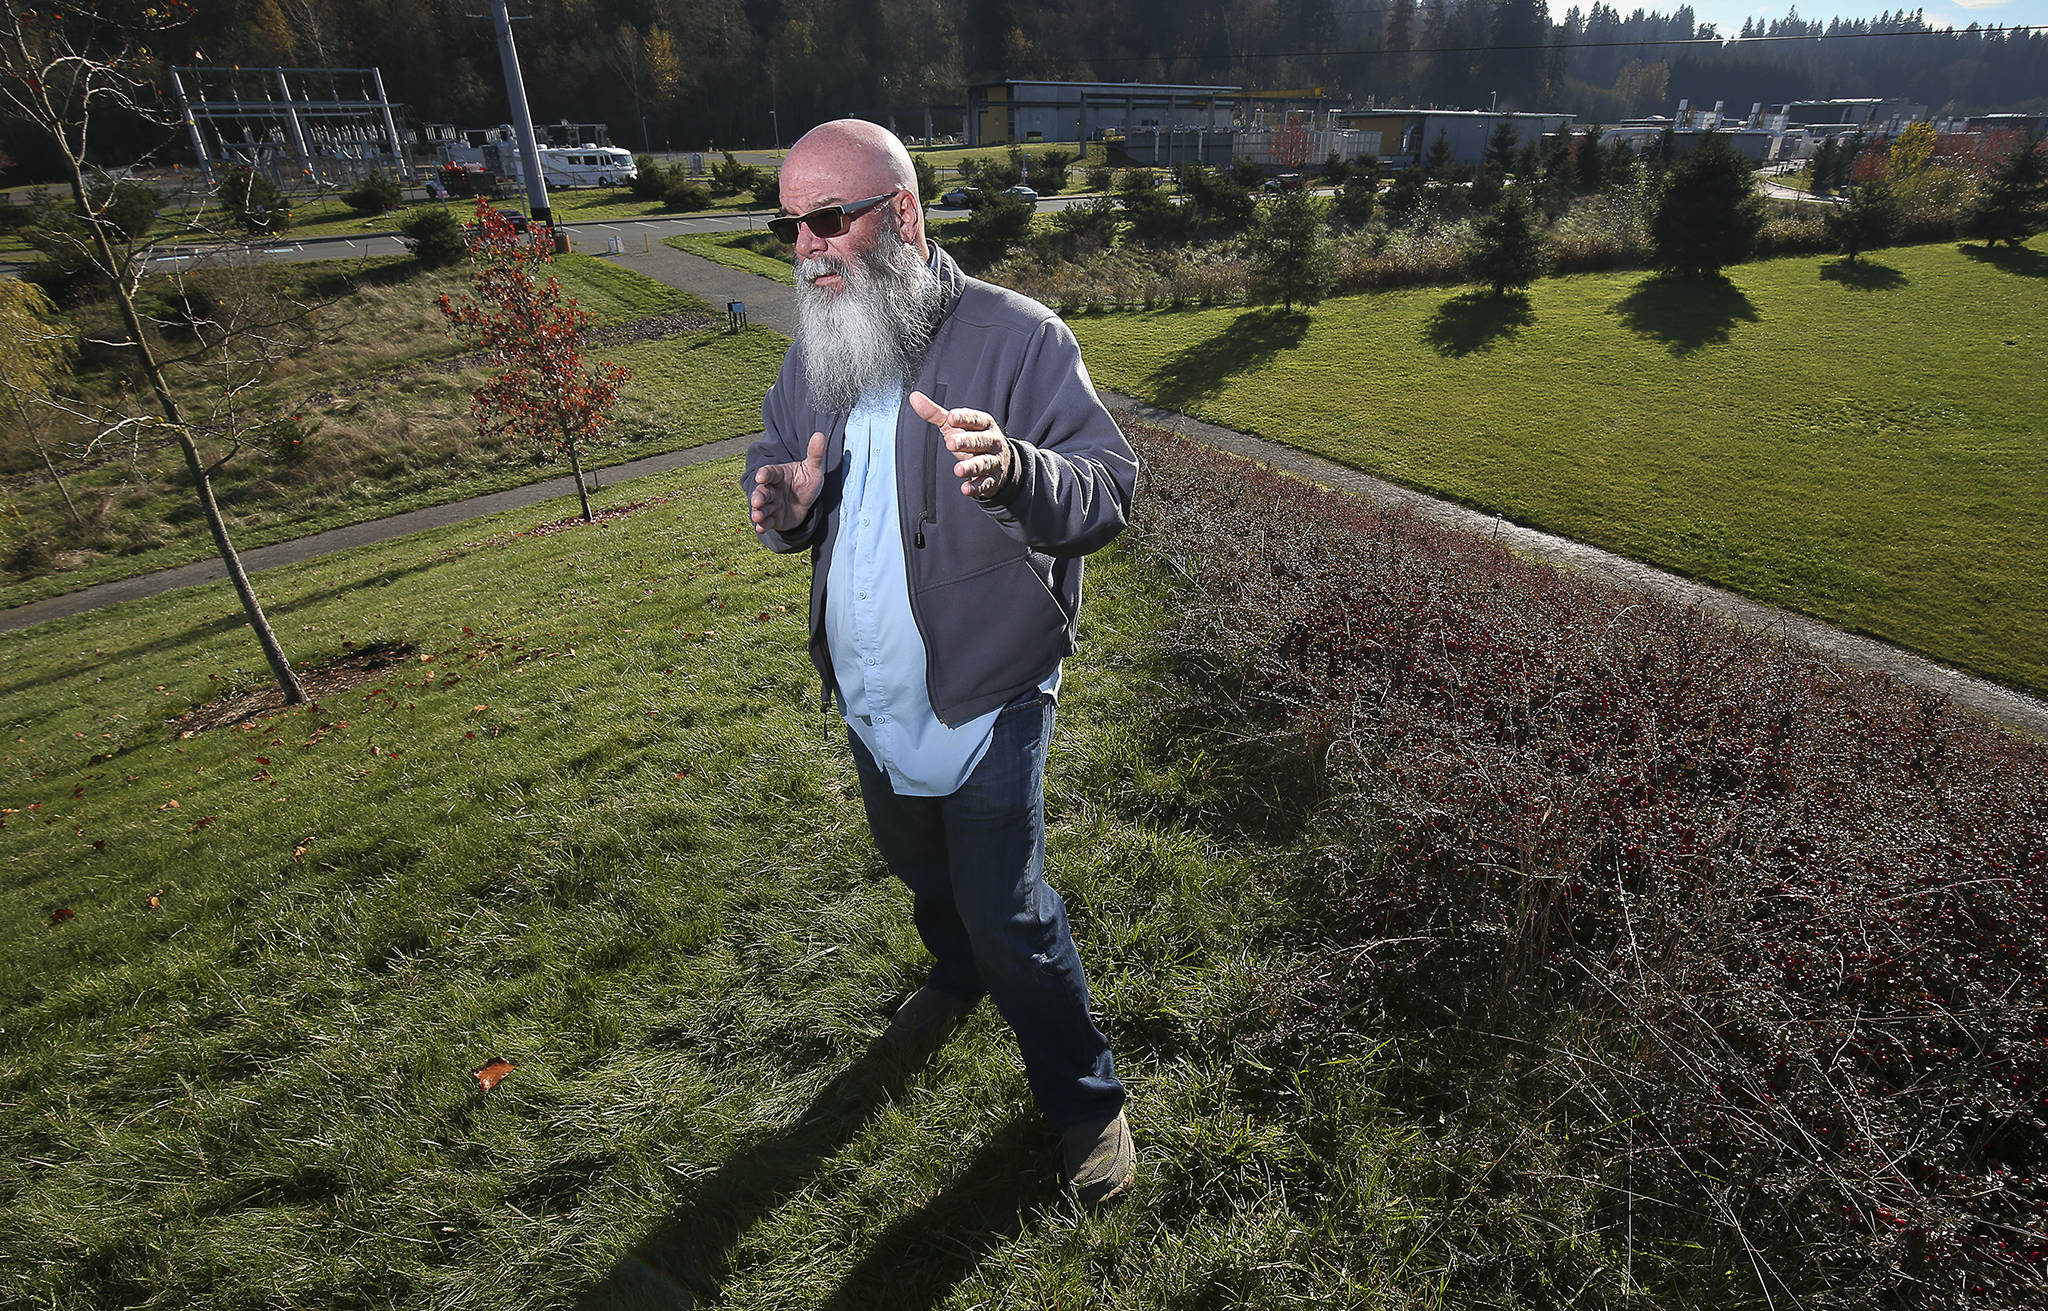 Geoscientist Brian Sherrod stands near where the southern Whidbey Island fault line runs underground, at the Brightwater Treatment Plant in Woodinville, Washington. (Andy Bronson / The Herald)